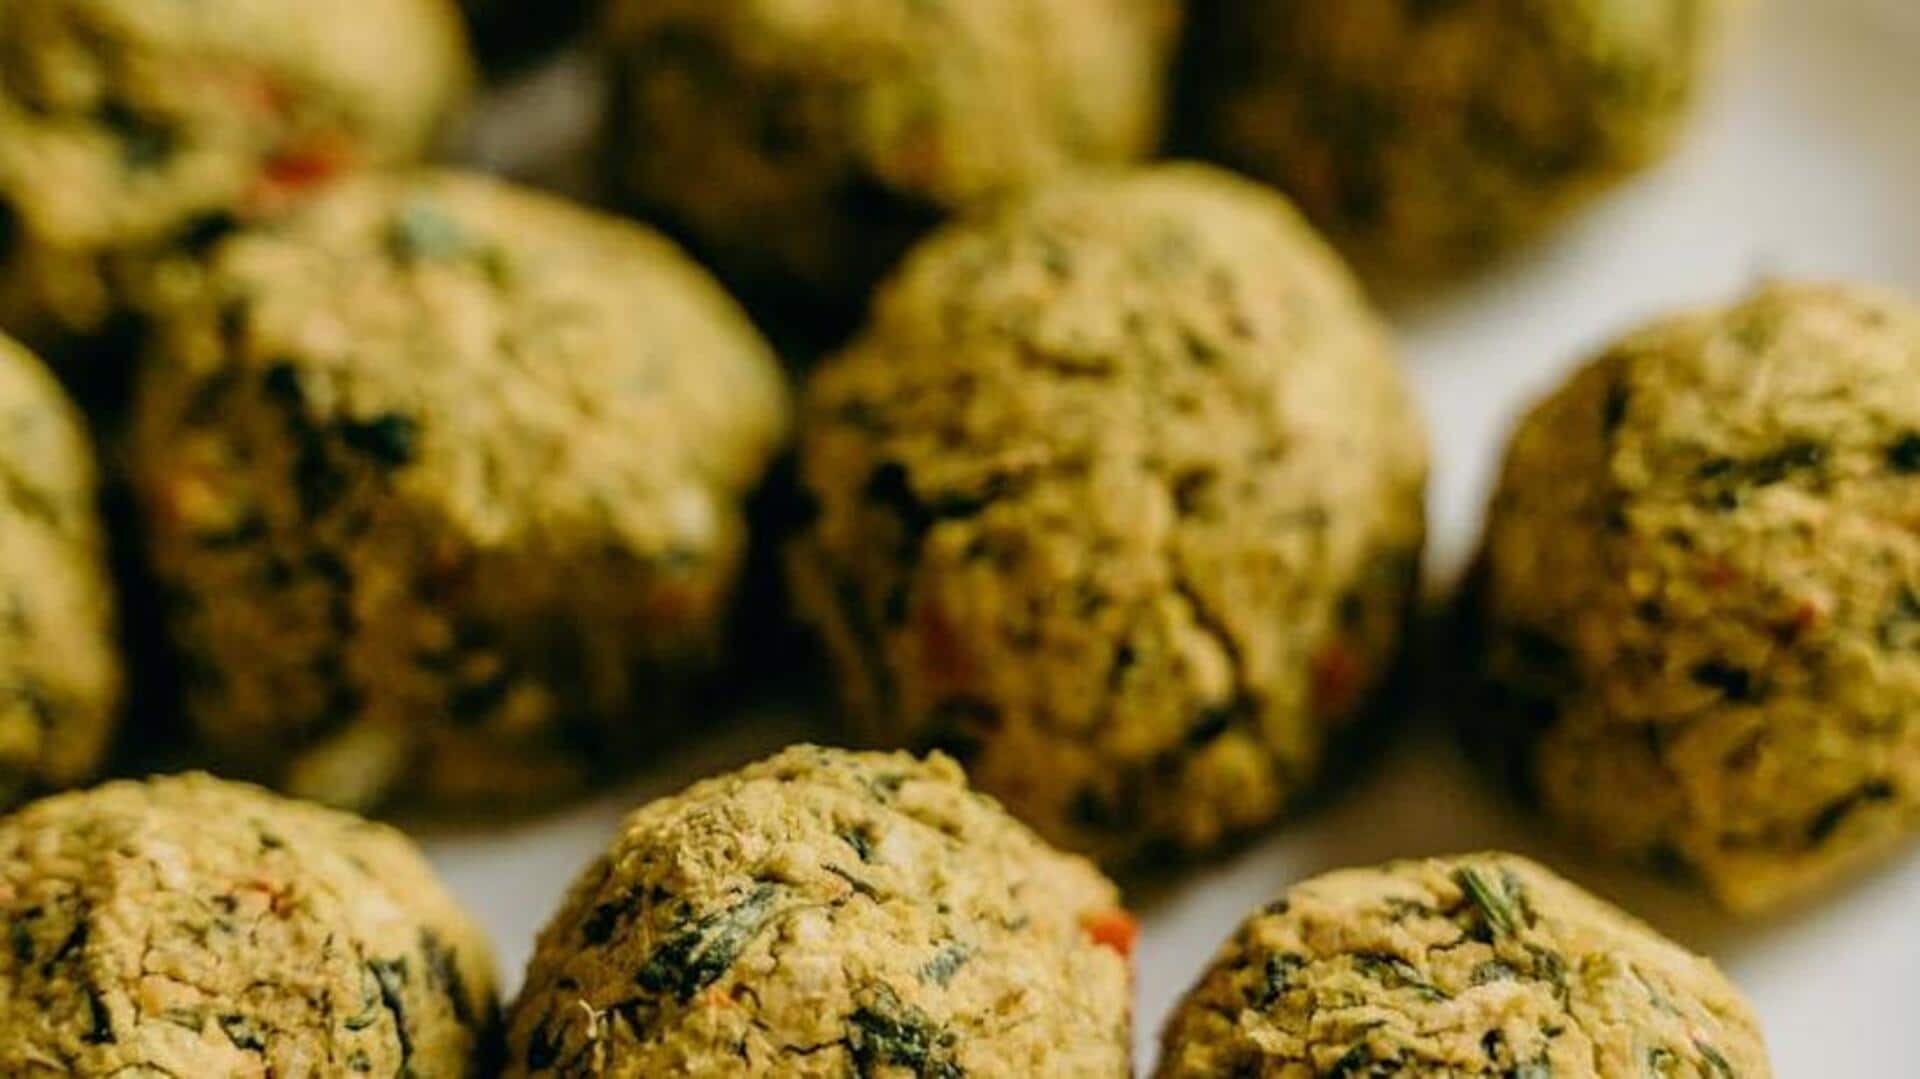 Crafting crispy baked falafel delight: A step-by-step guide